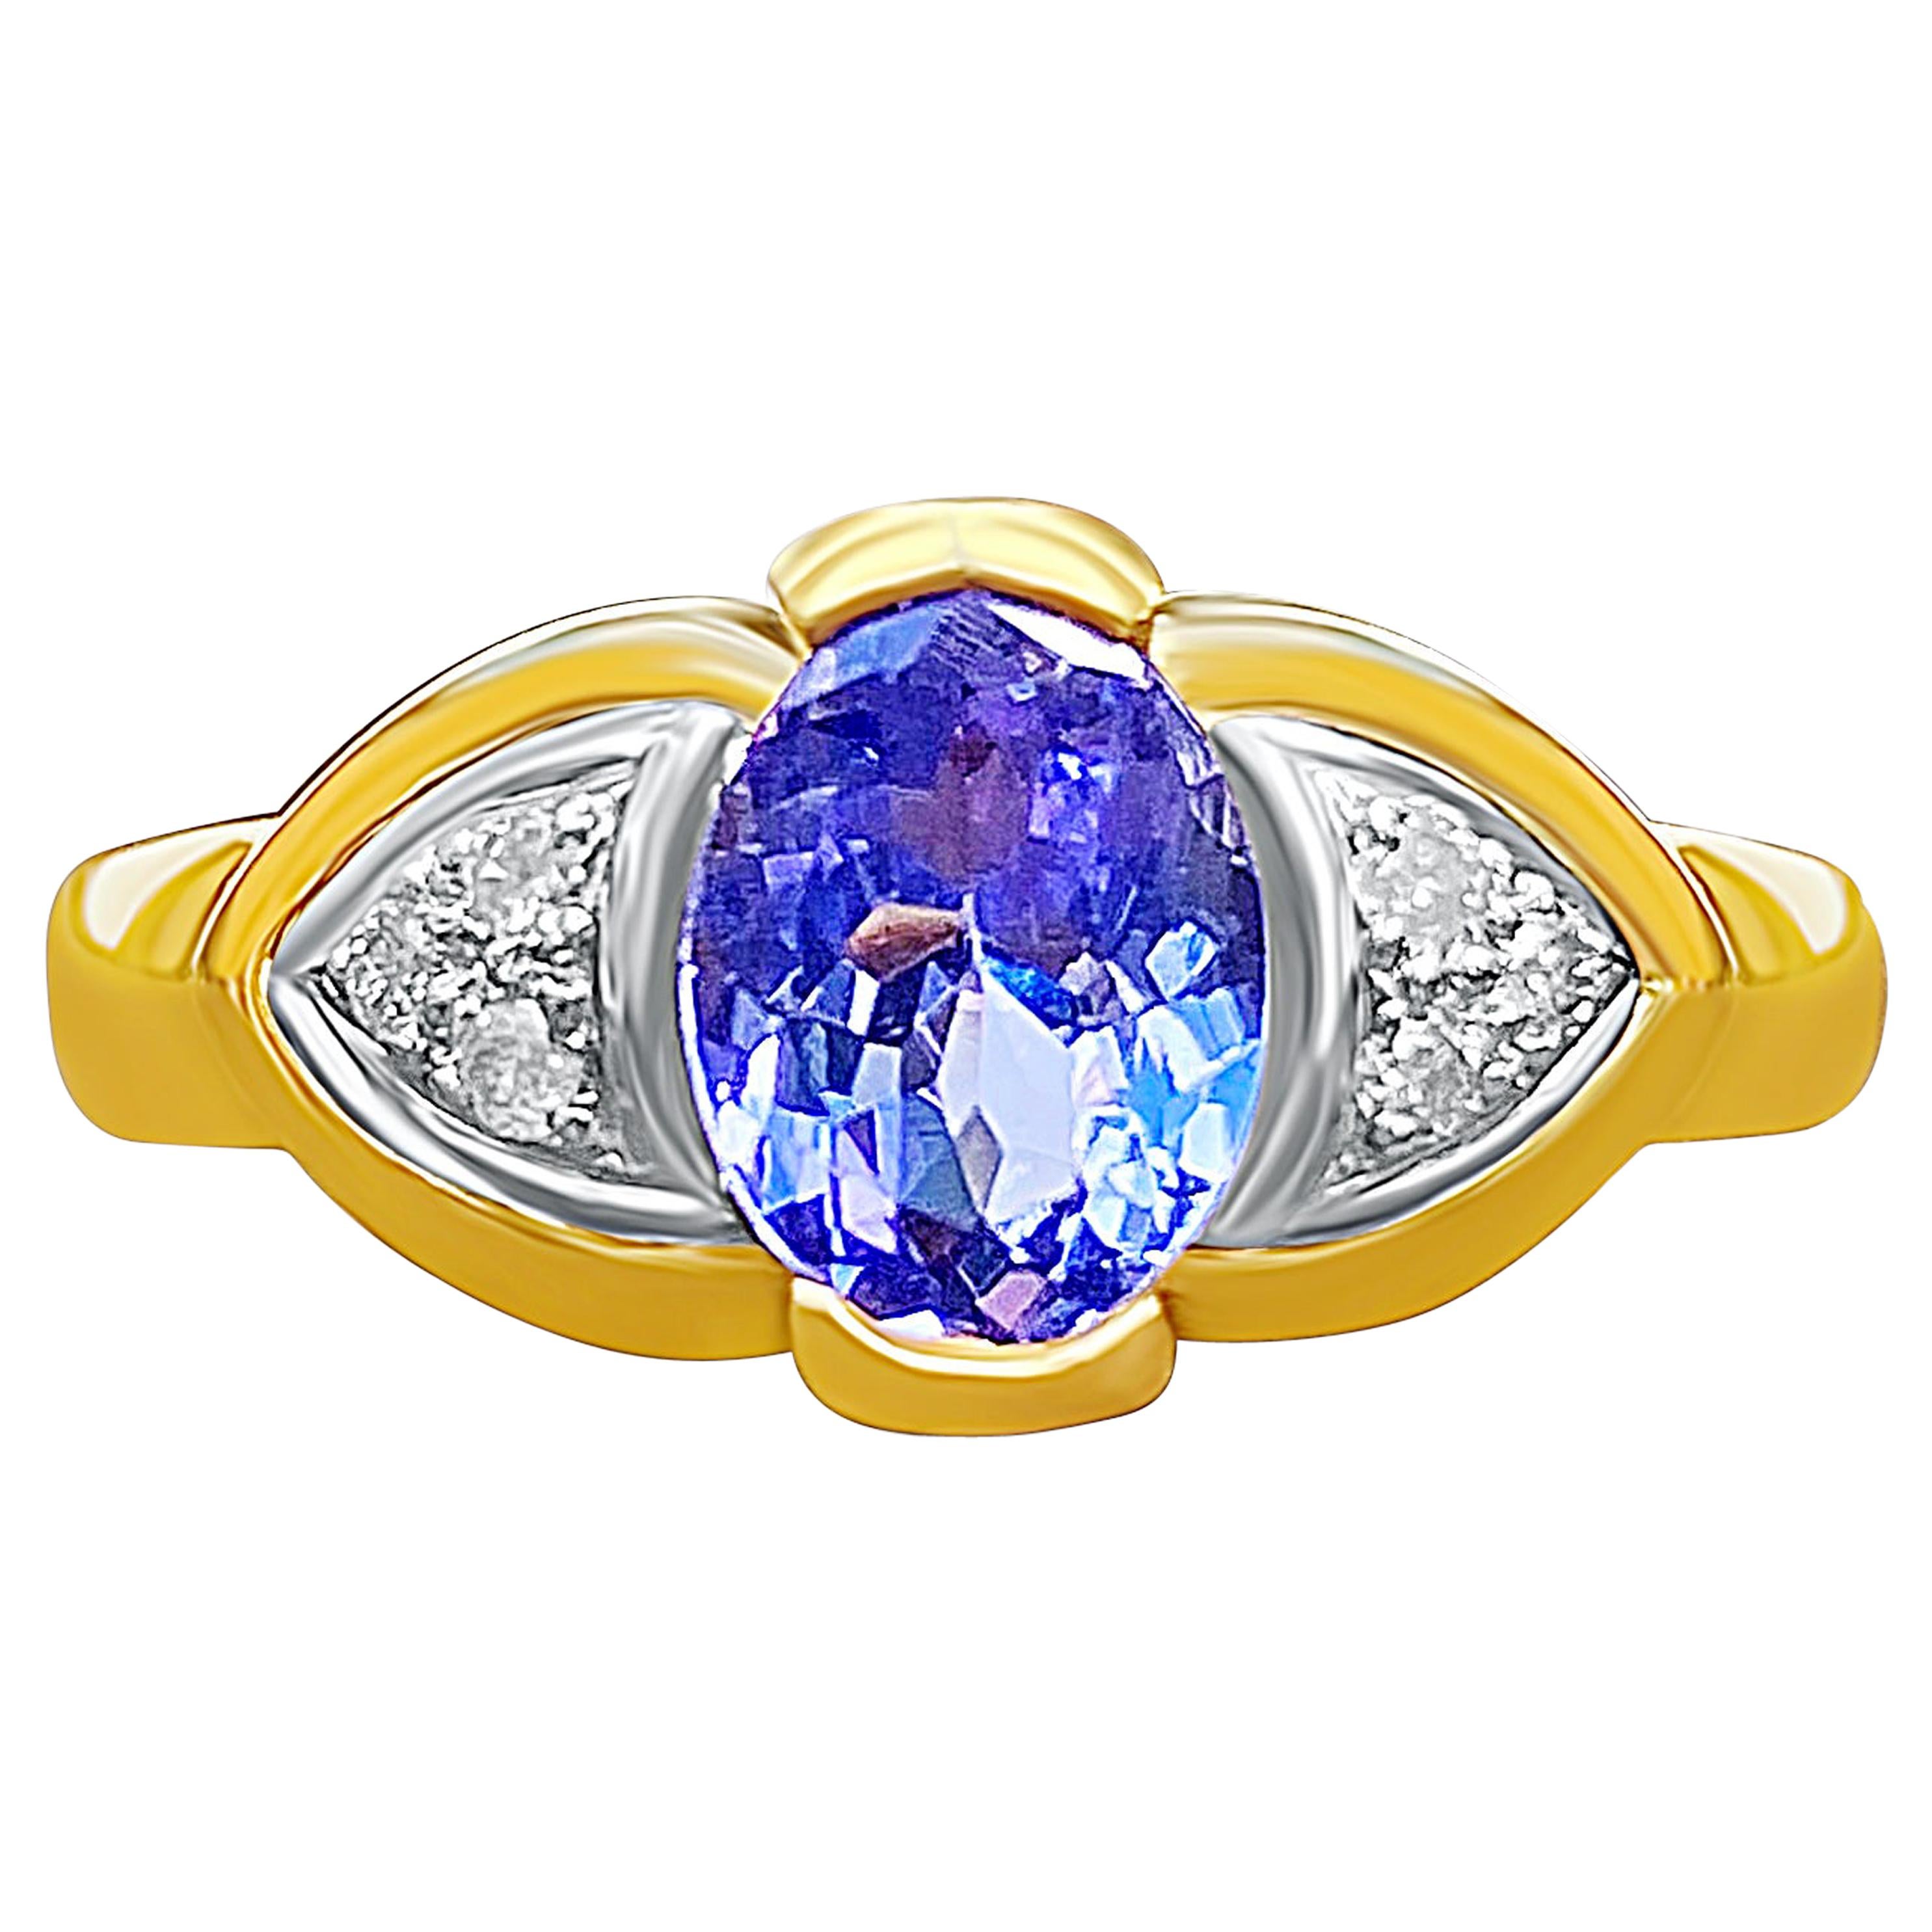 "Evil Eye" 1.23ct Oval Cut Tanzanite and Diamond and 14K Yellow Gold Ring